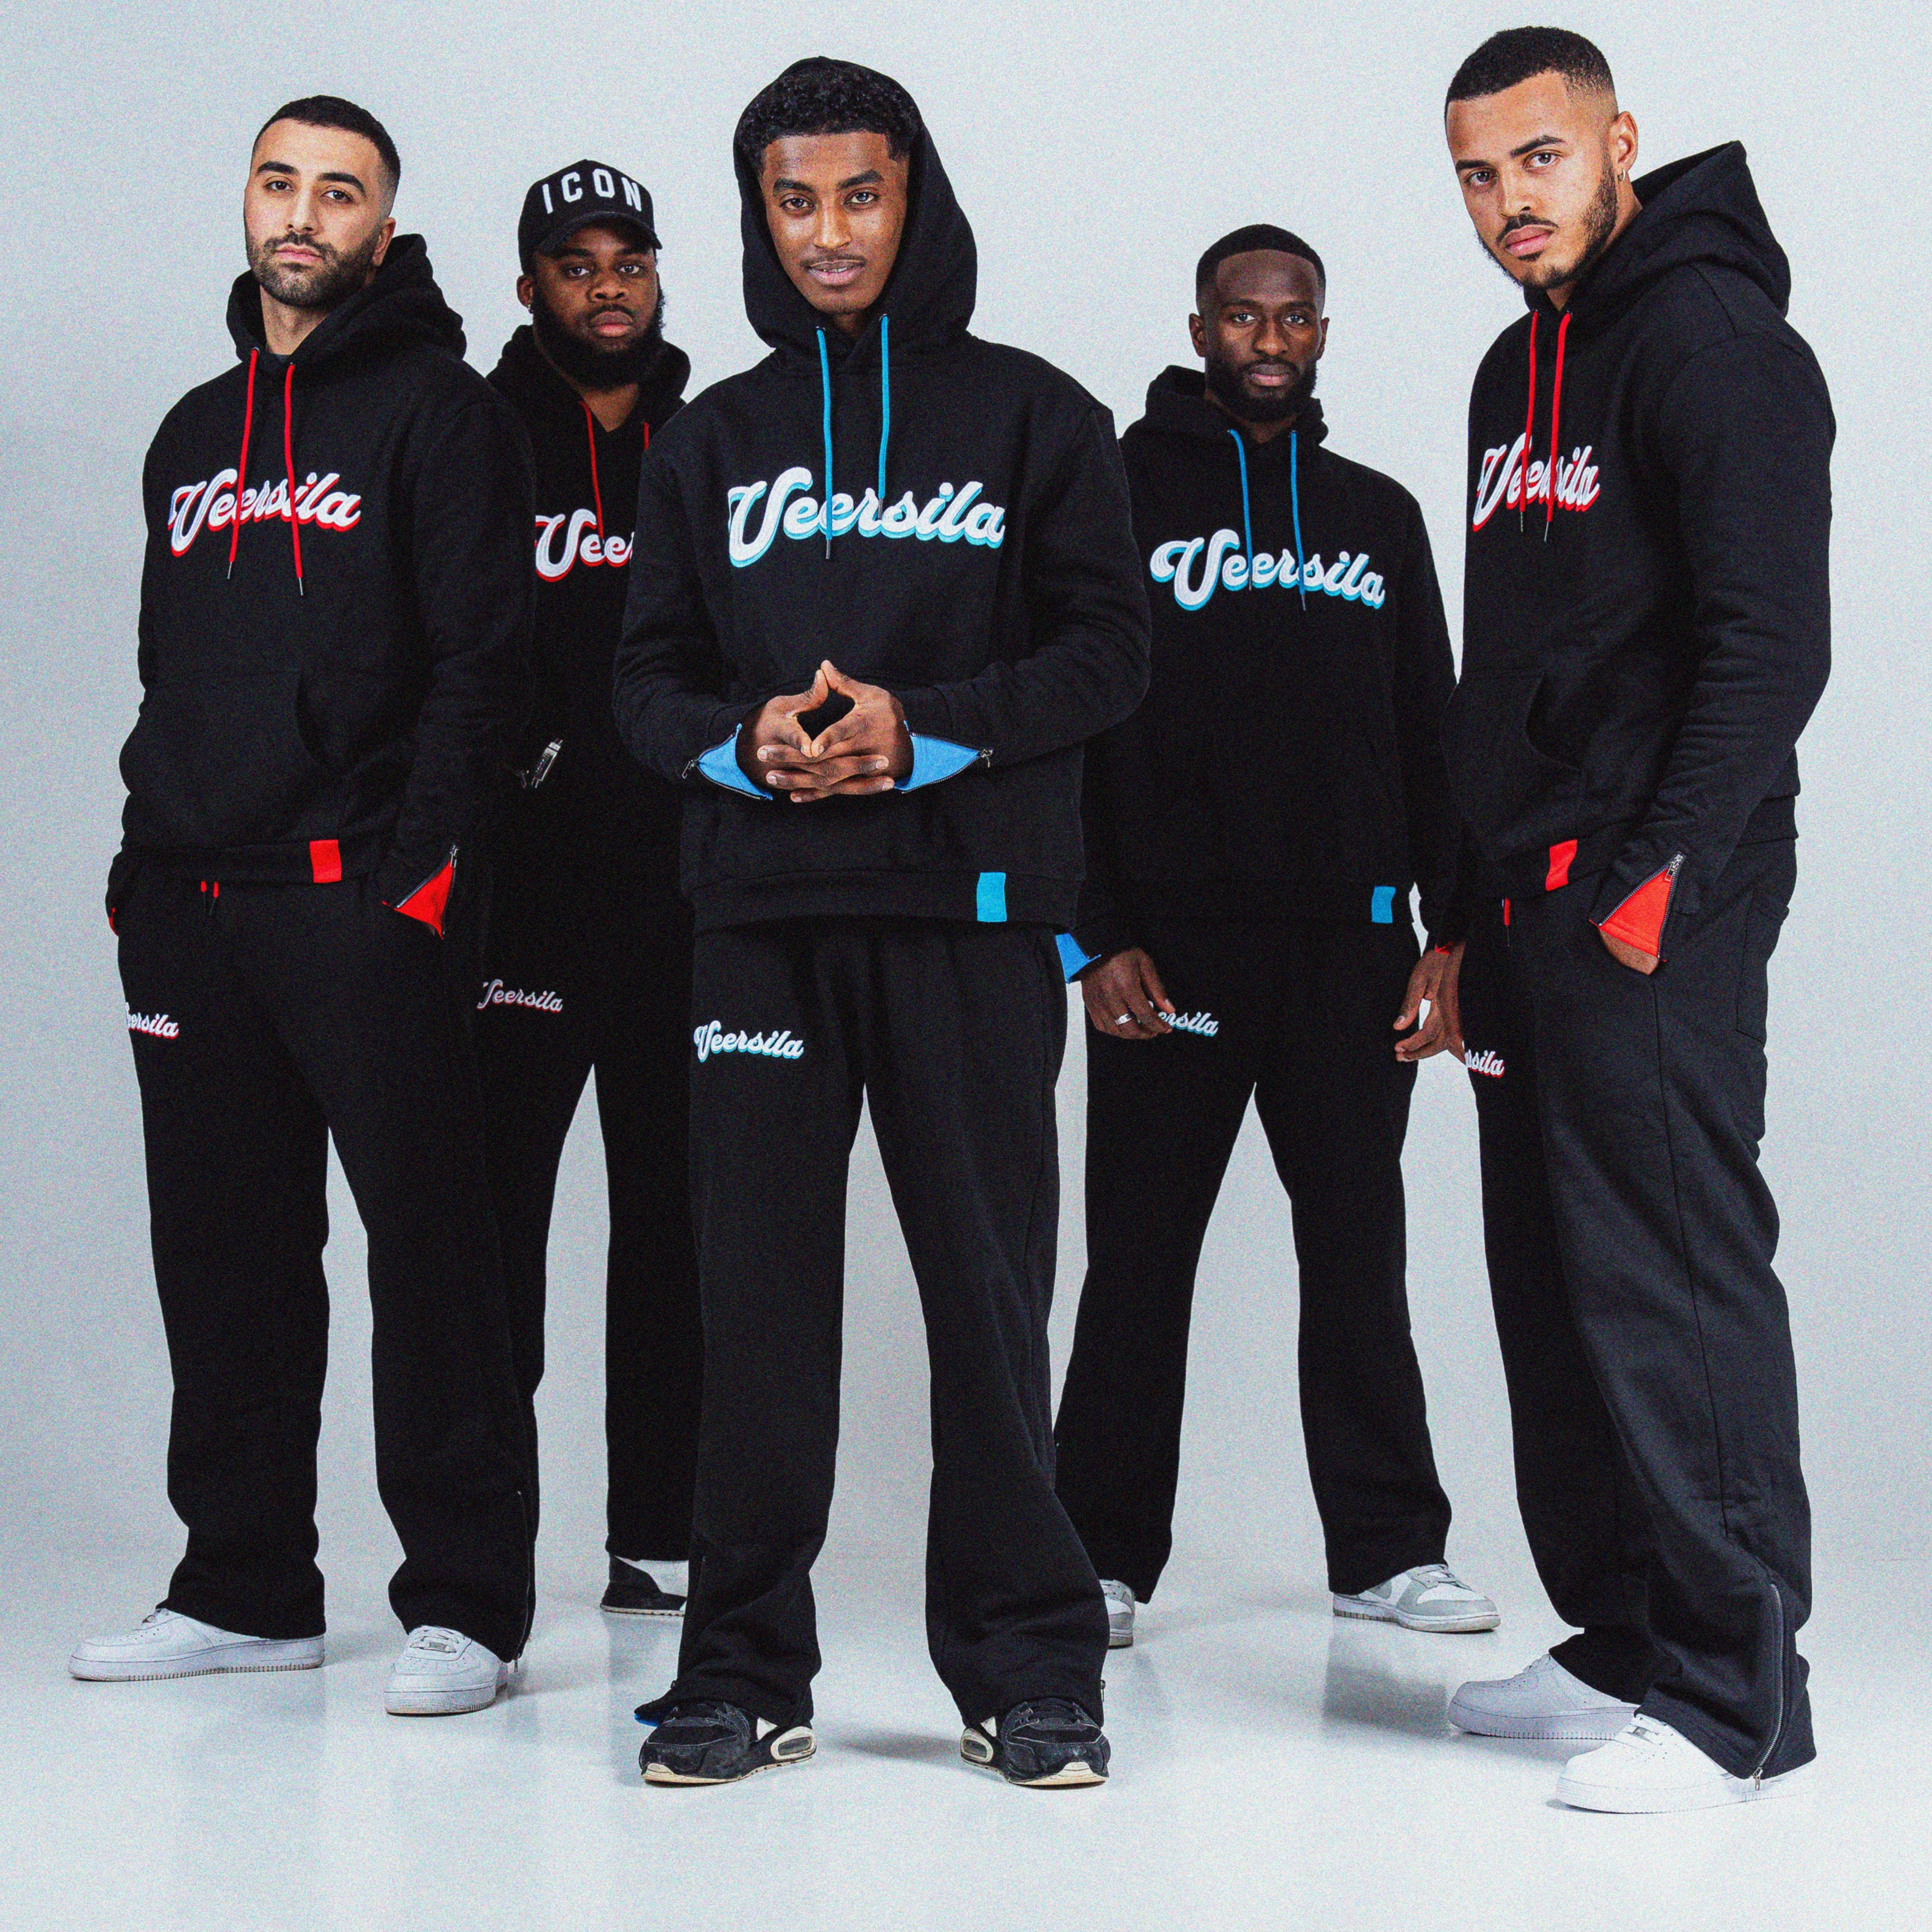 Models wearing the Veersila Tracksuit in red and blue